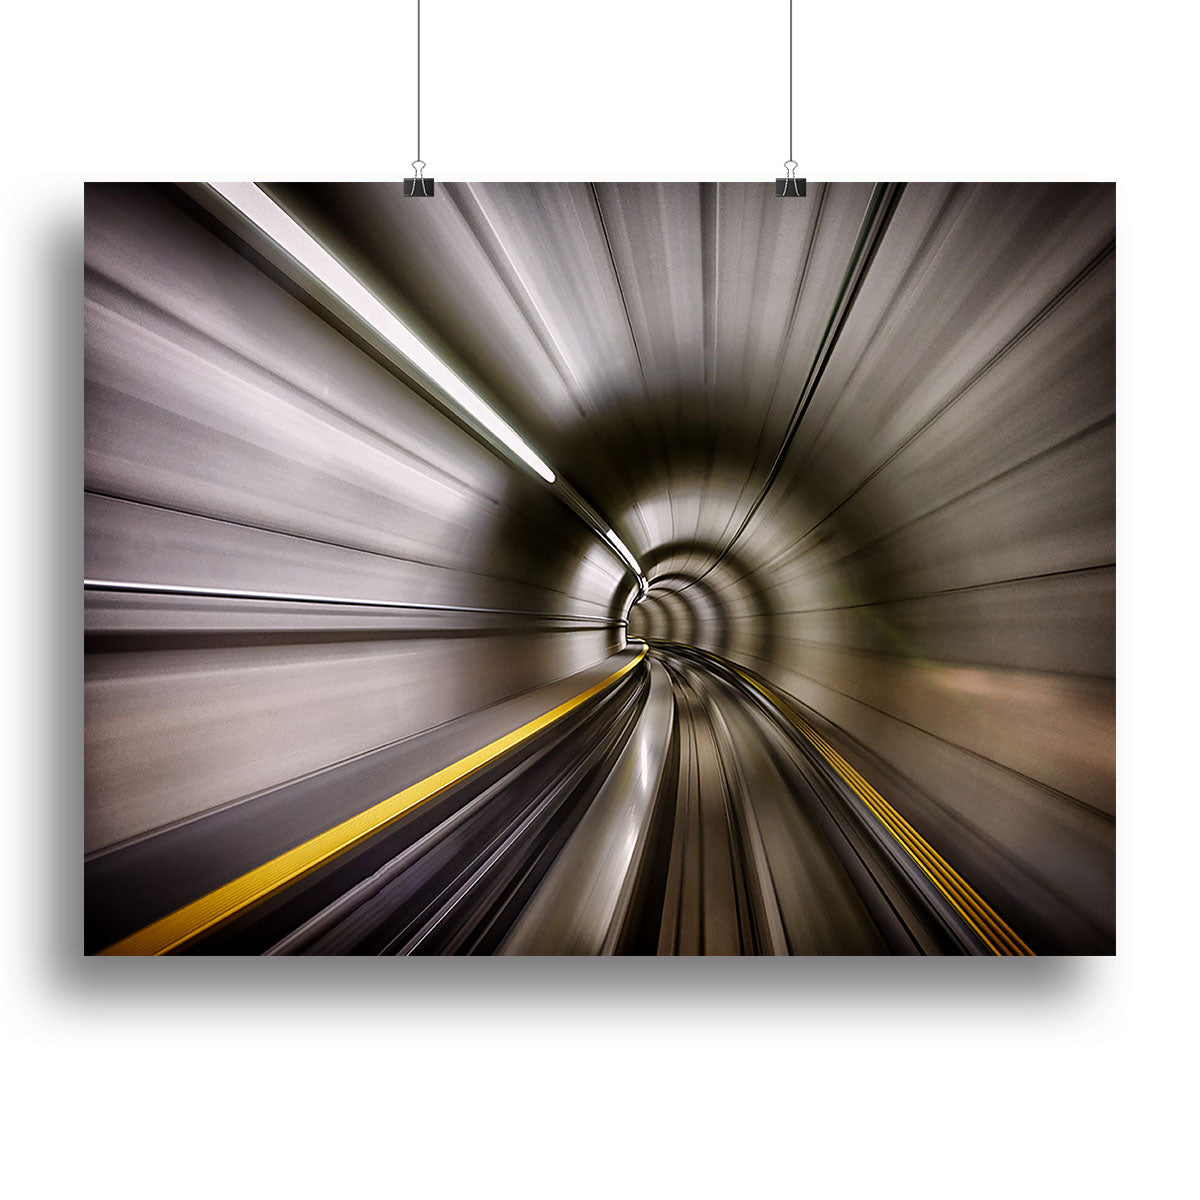 In Canvas Print or Poster - Canvas Art Rocks - 2